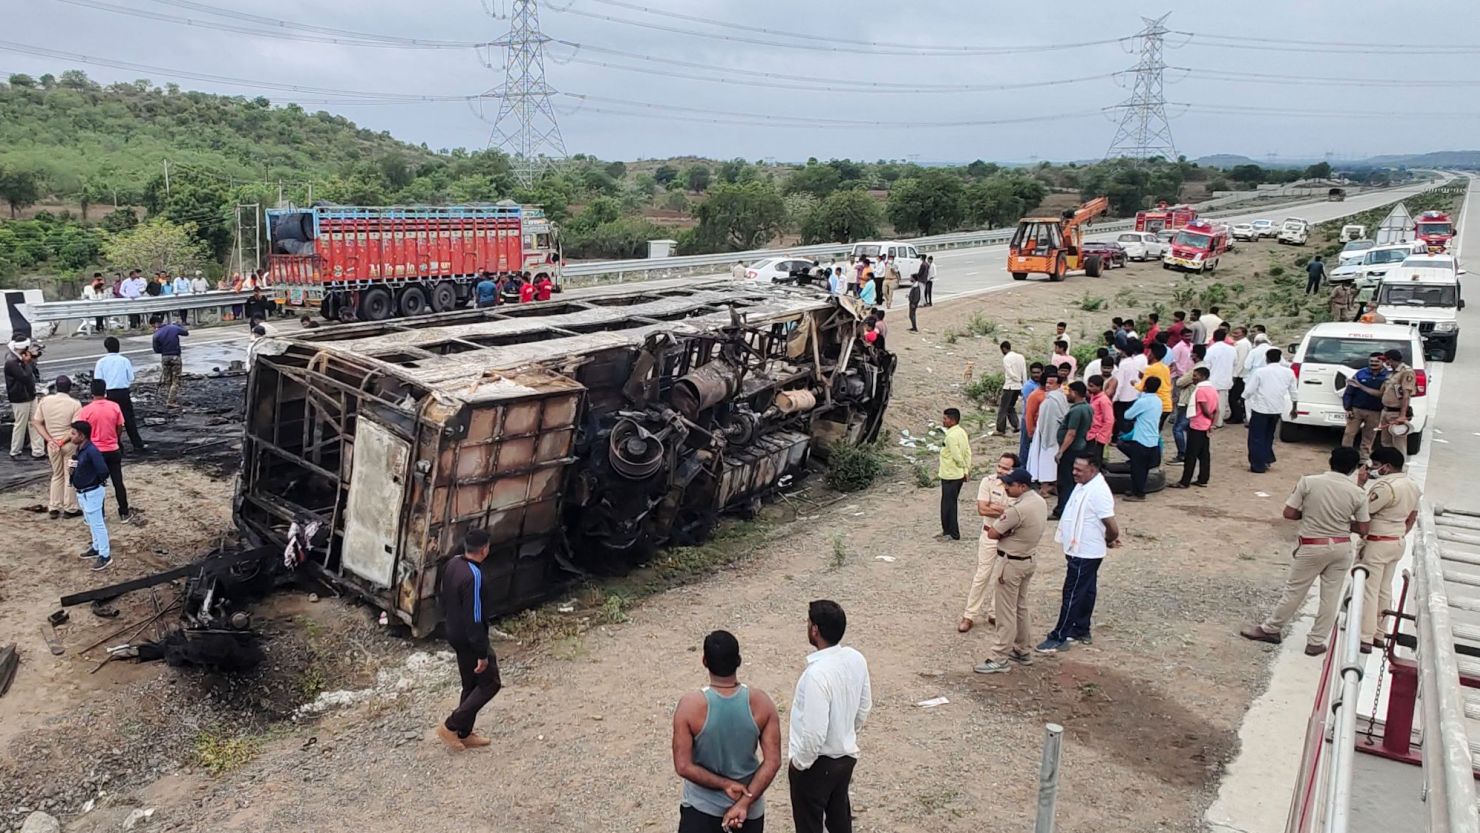 People gather around the wreckage of a bus that caught fire along the Samruddhi Mahamarg expressway near Sindkhed Raja in the Buldhana district of Maharashtra state, India, on July 1, 2023.